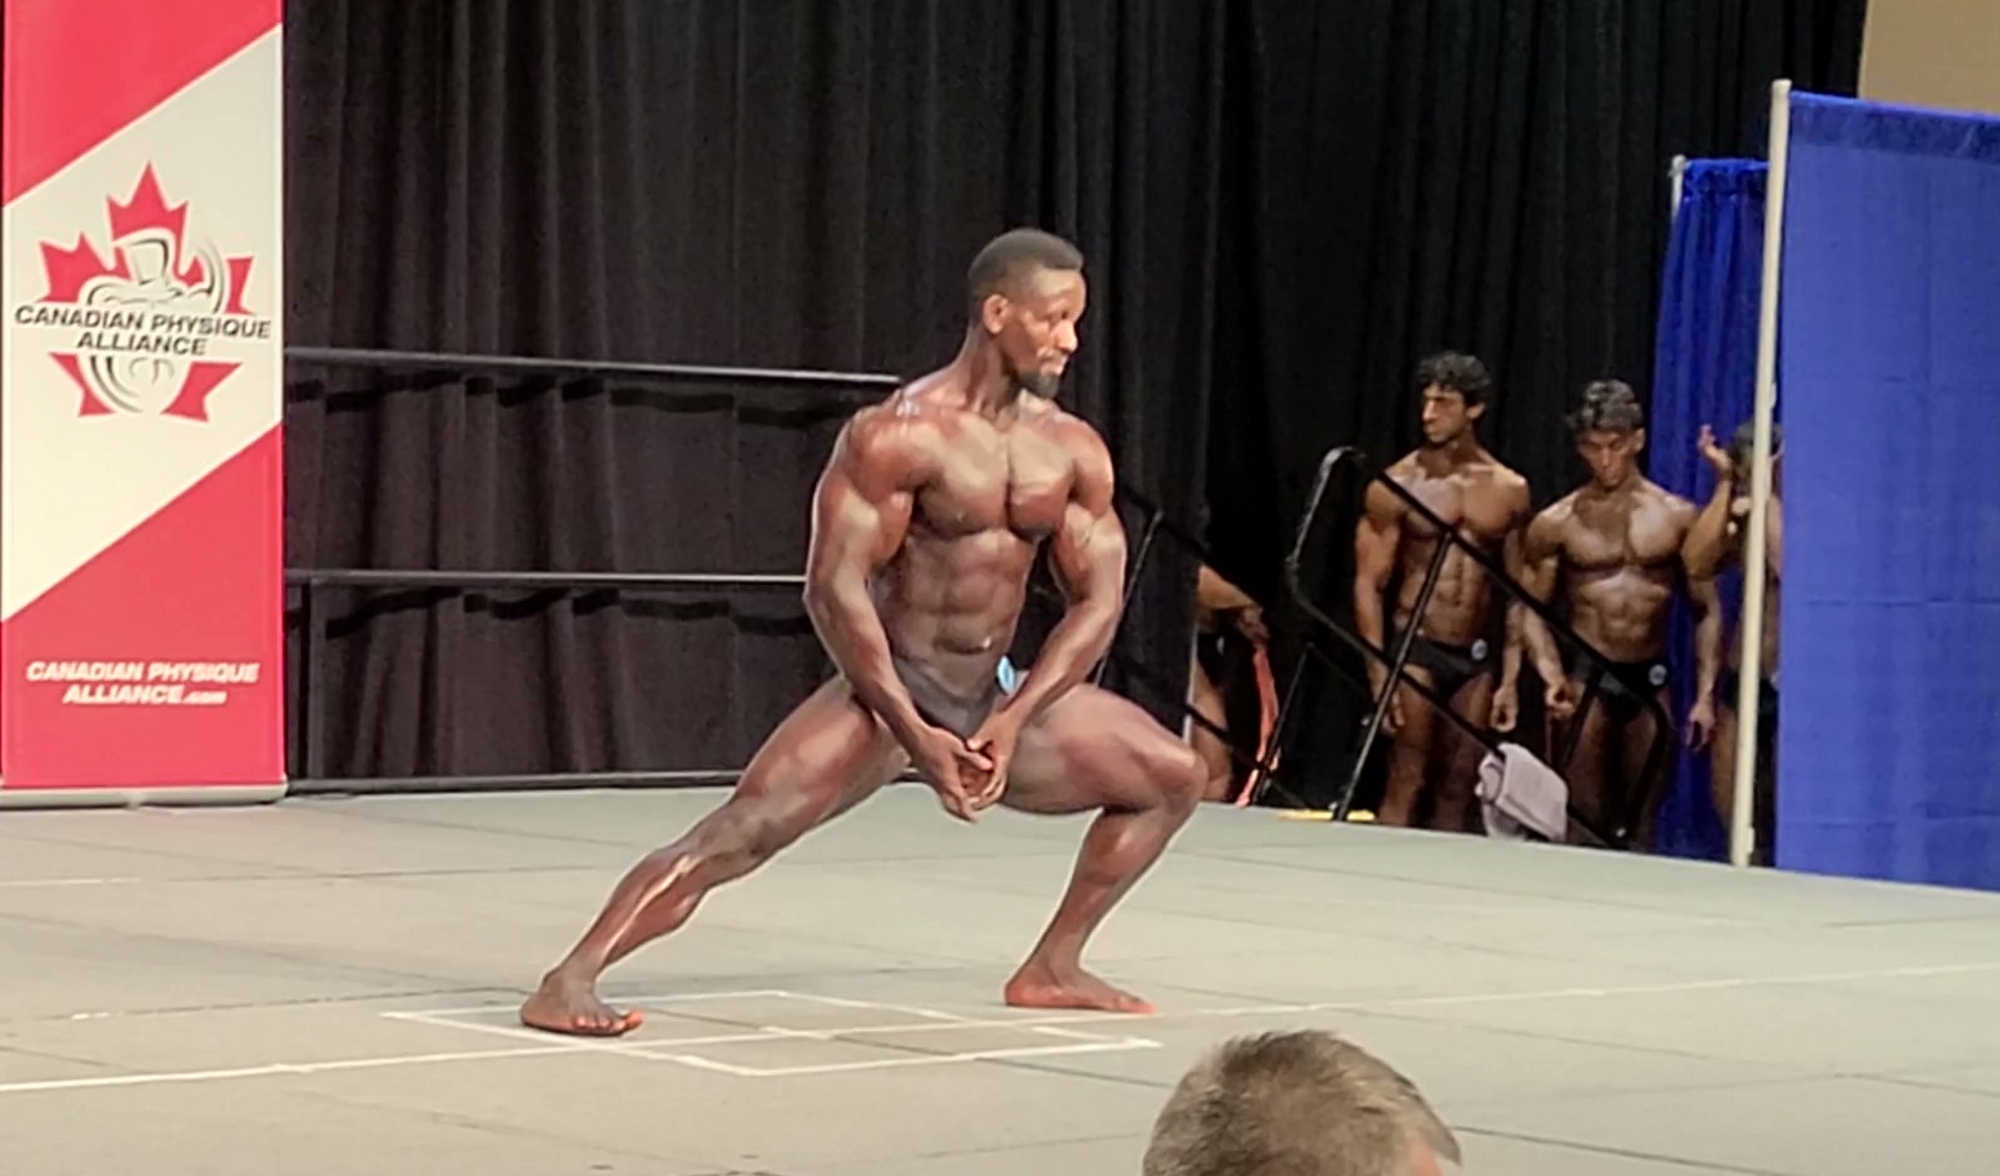 Amazing and fluid poses by bodybuilder. Bodybuilding posing routine.